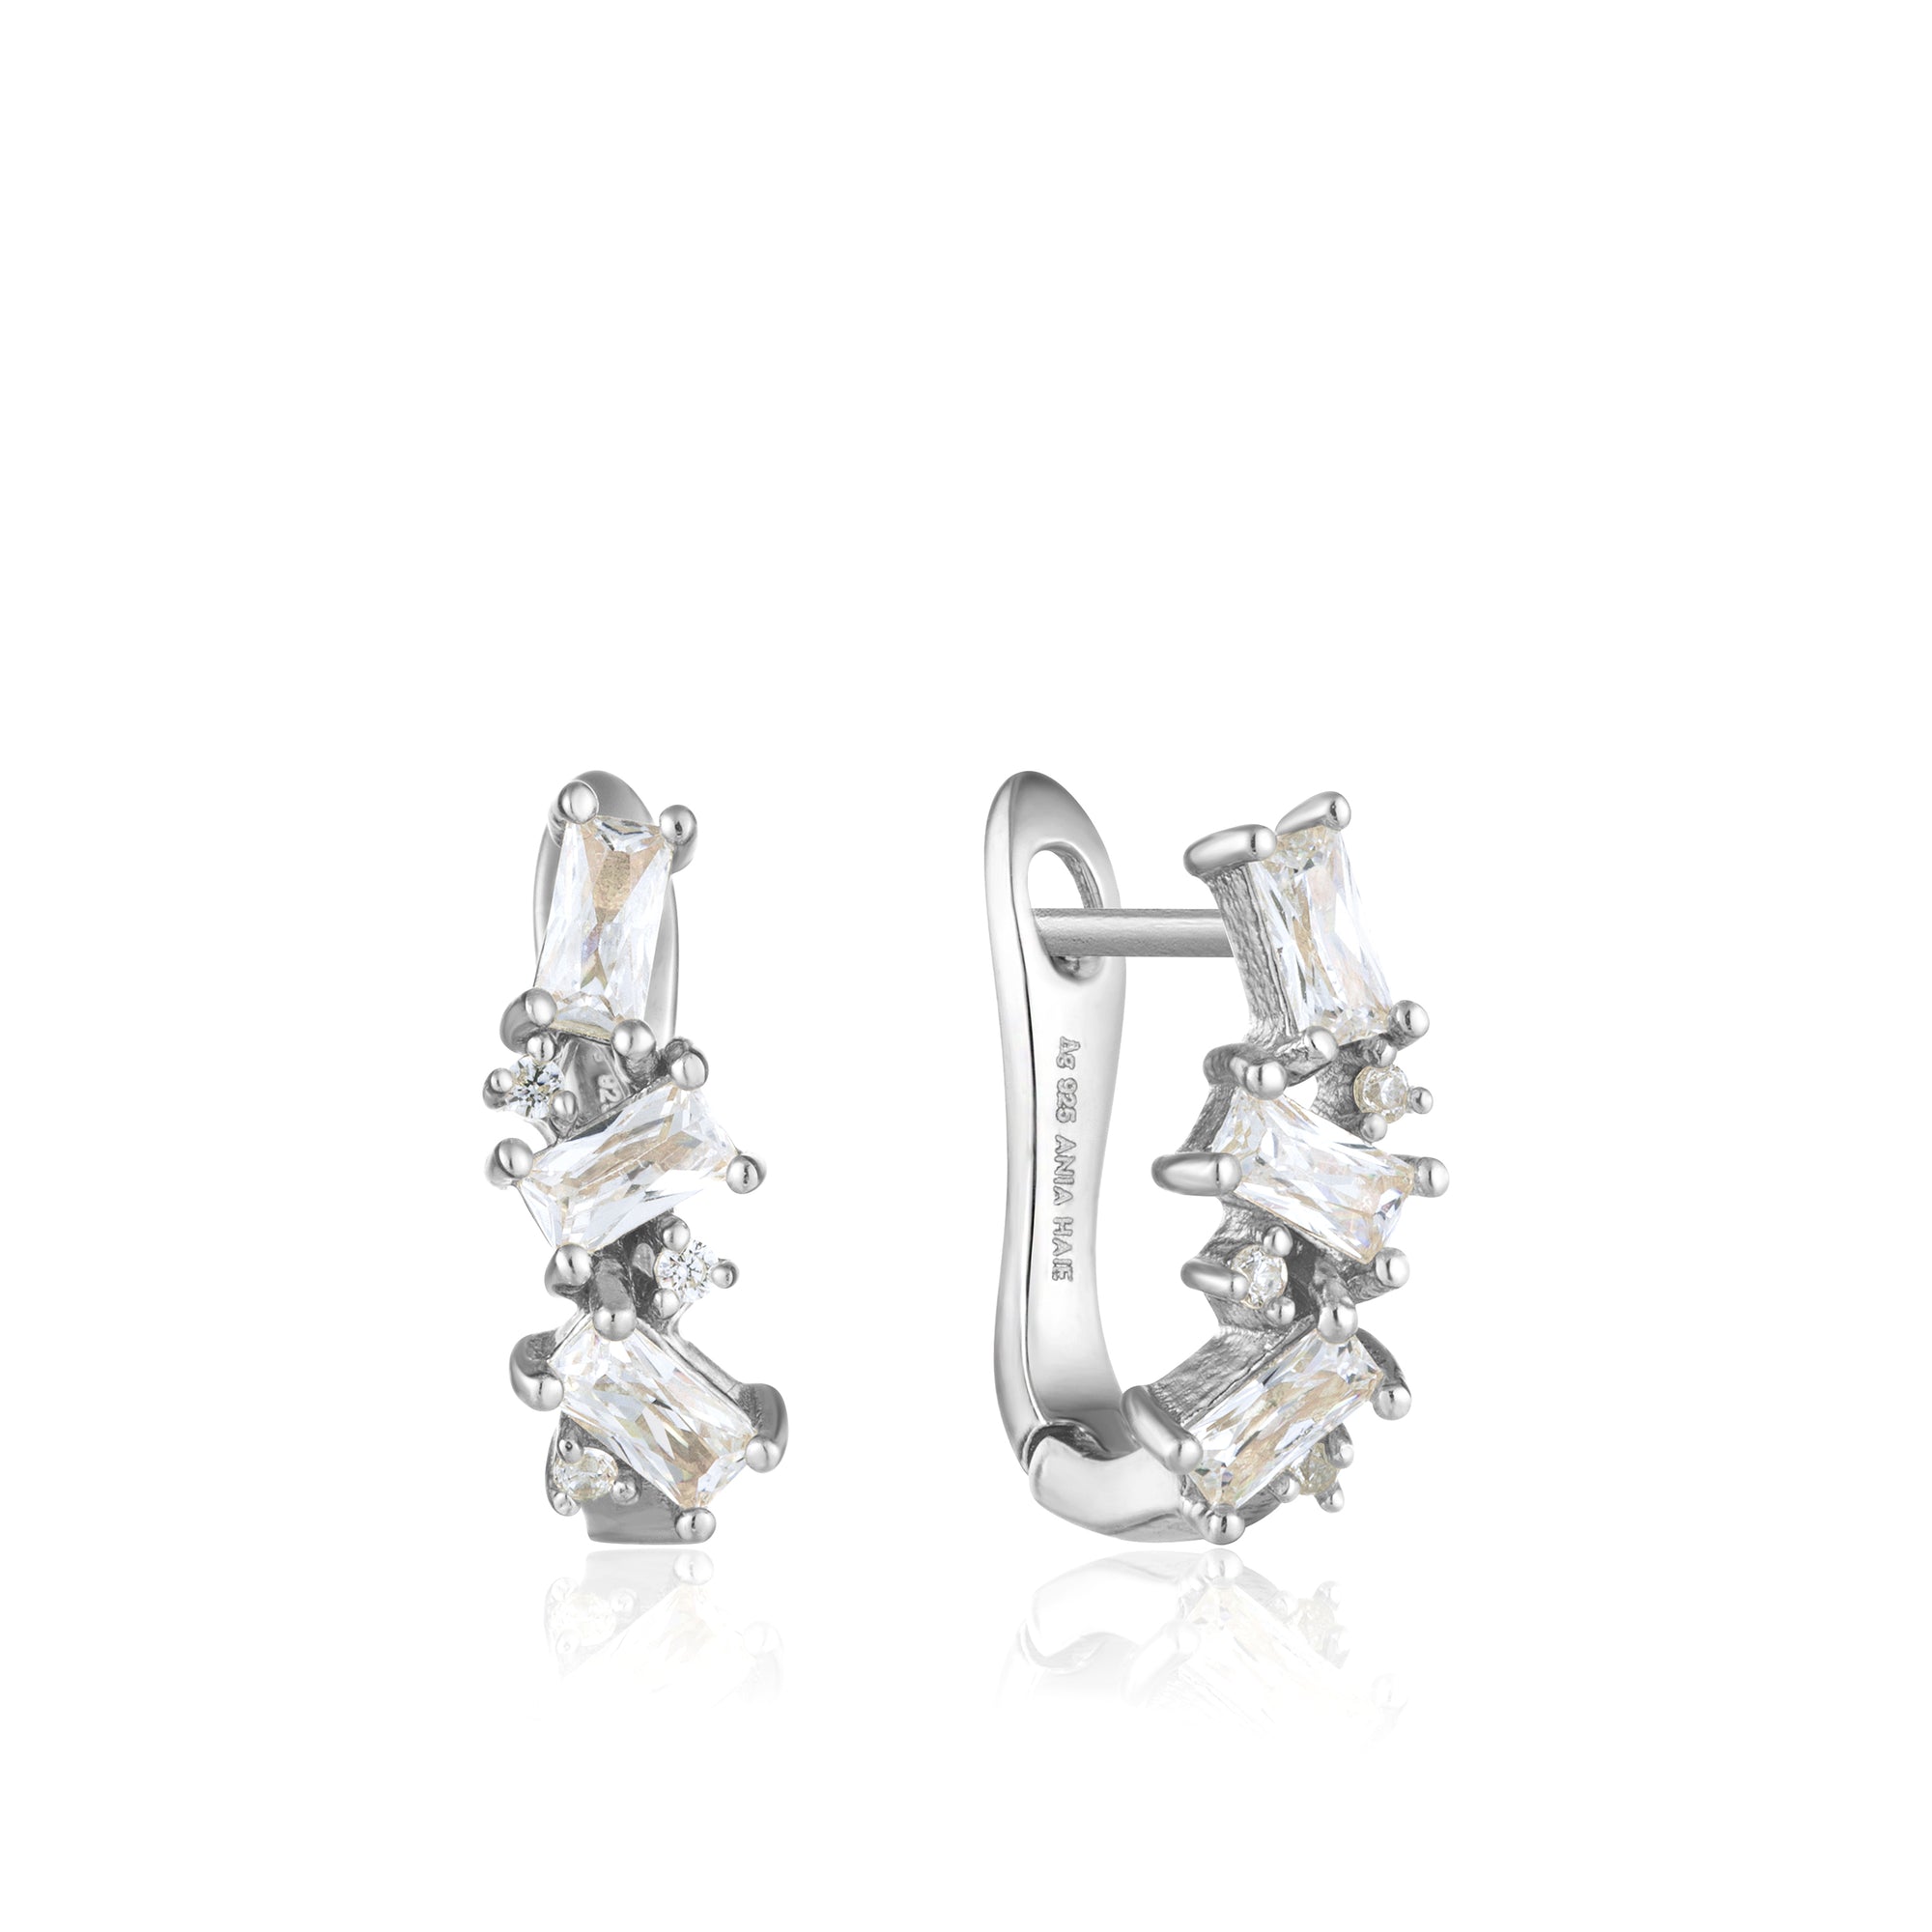 ANIA HAIE ANIA HAIE - Silver Cluster Huggie Earrings available at The Good Life Boutique